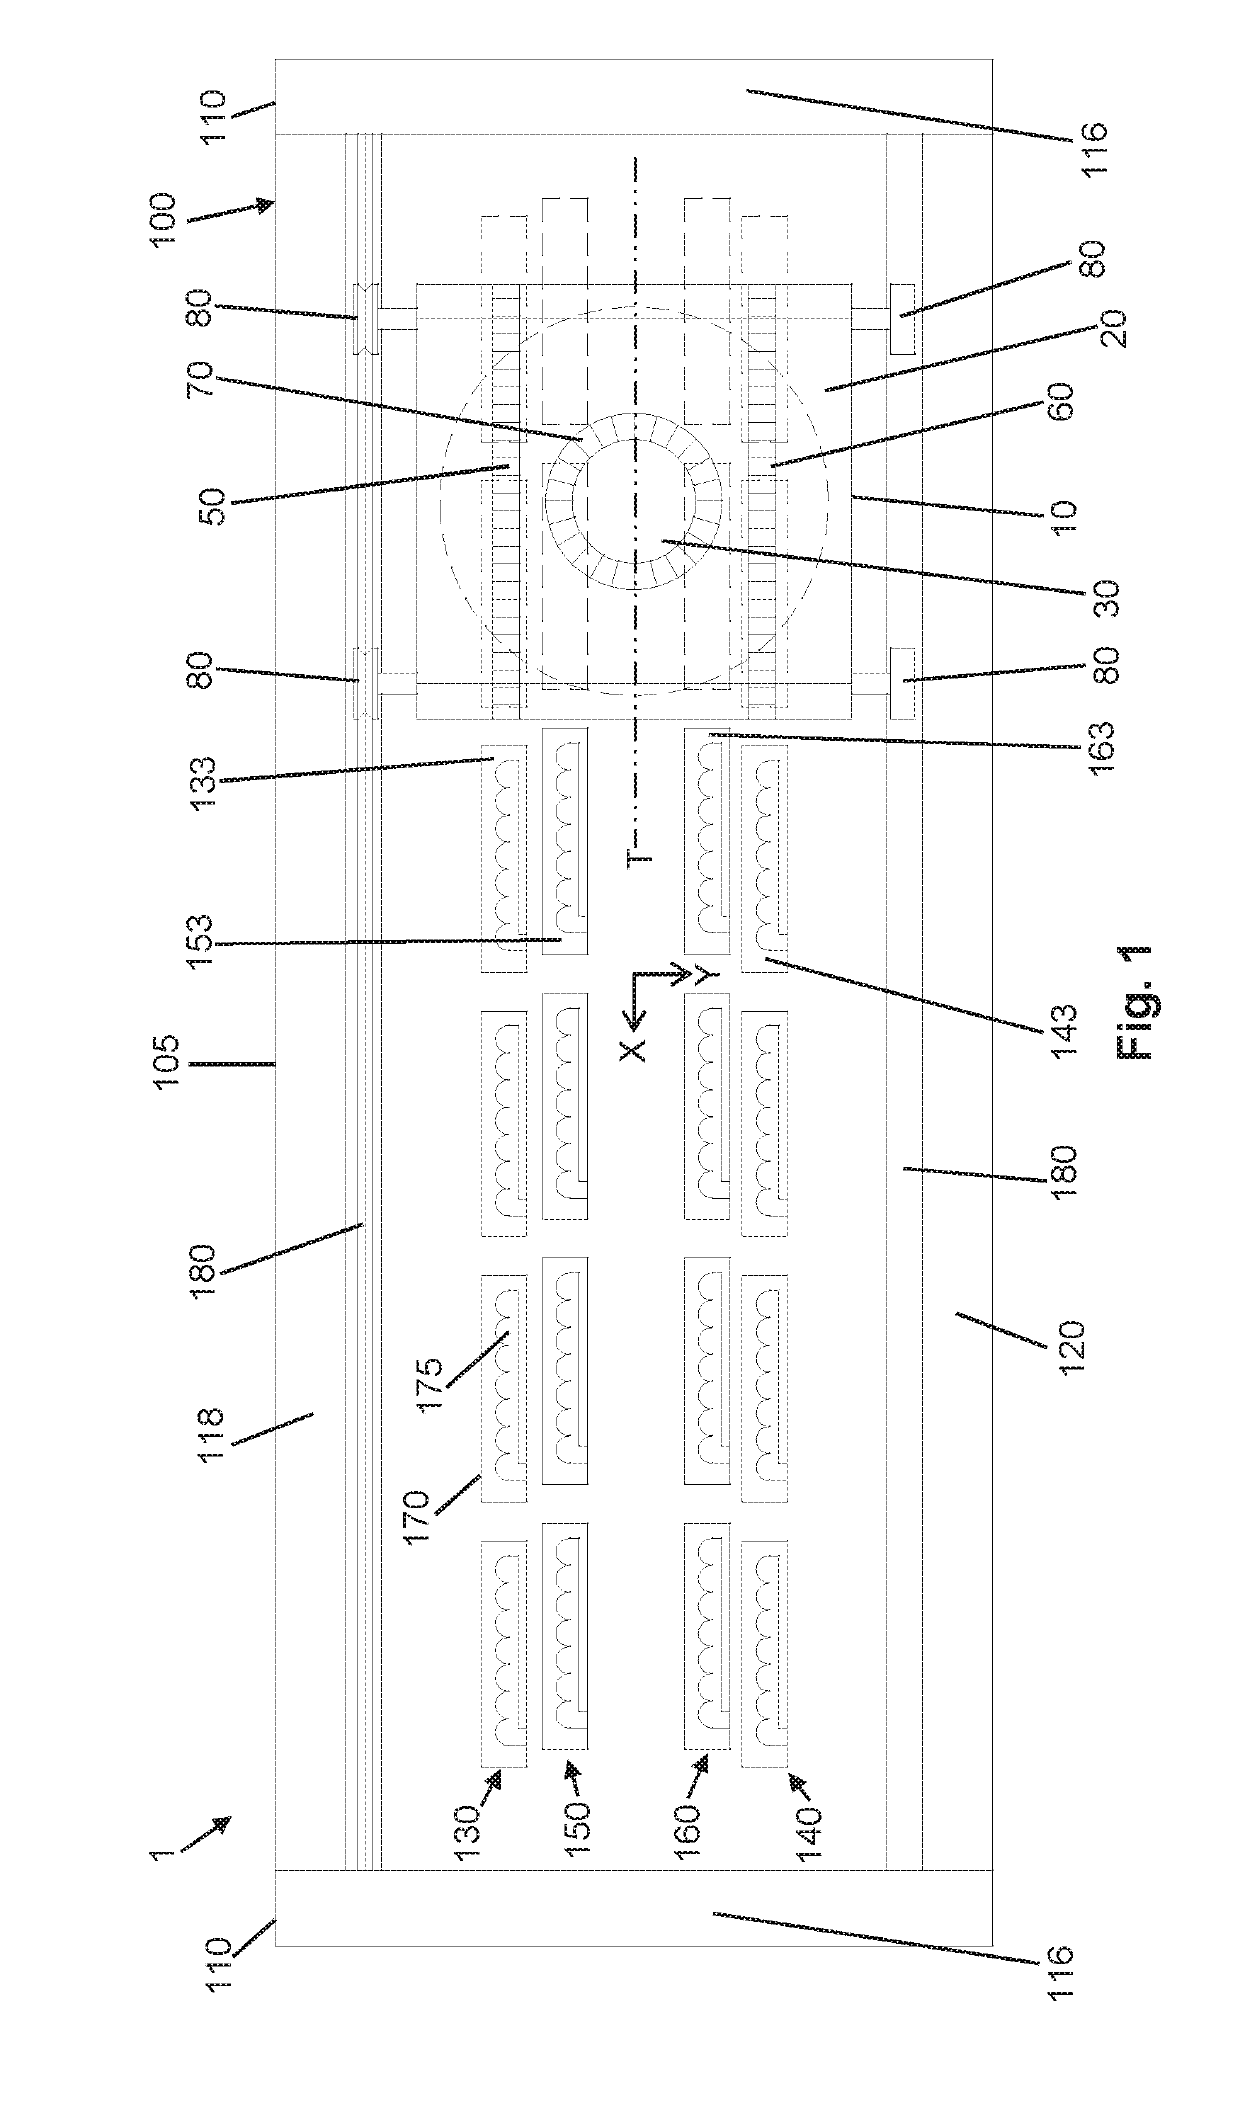 Device for processing a component, carriage for the device, and method for operating the device